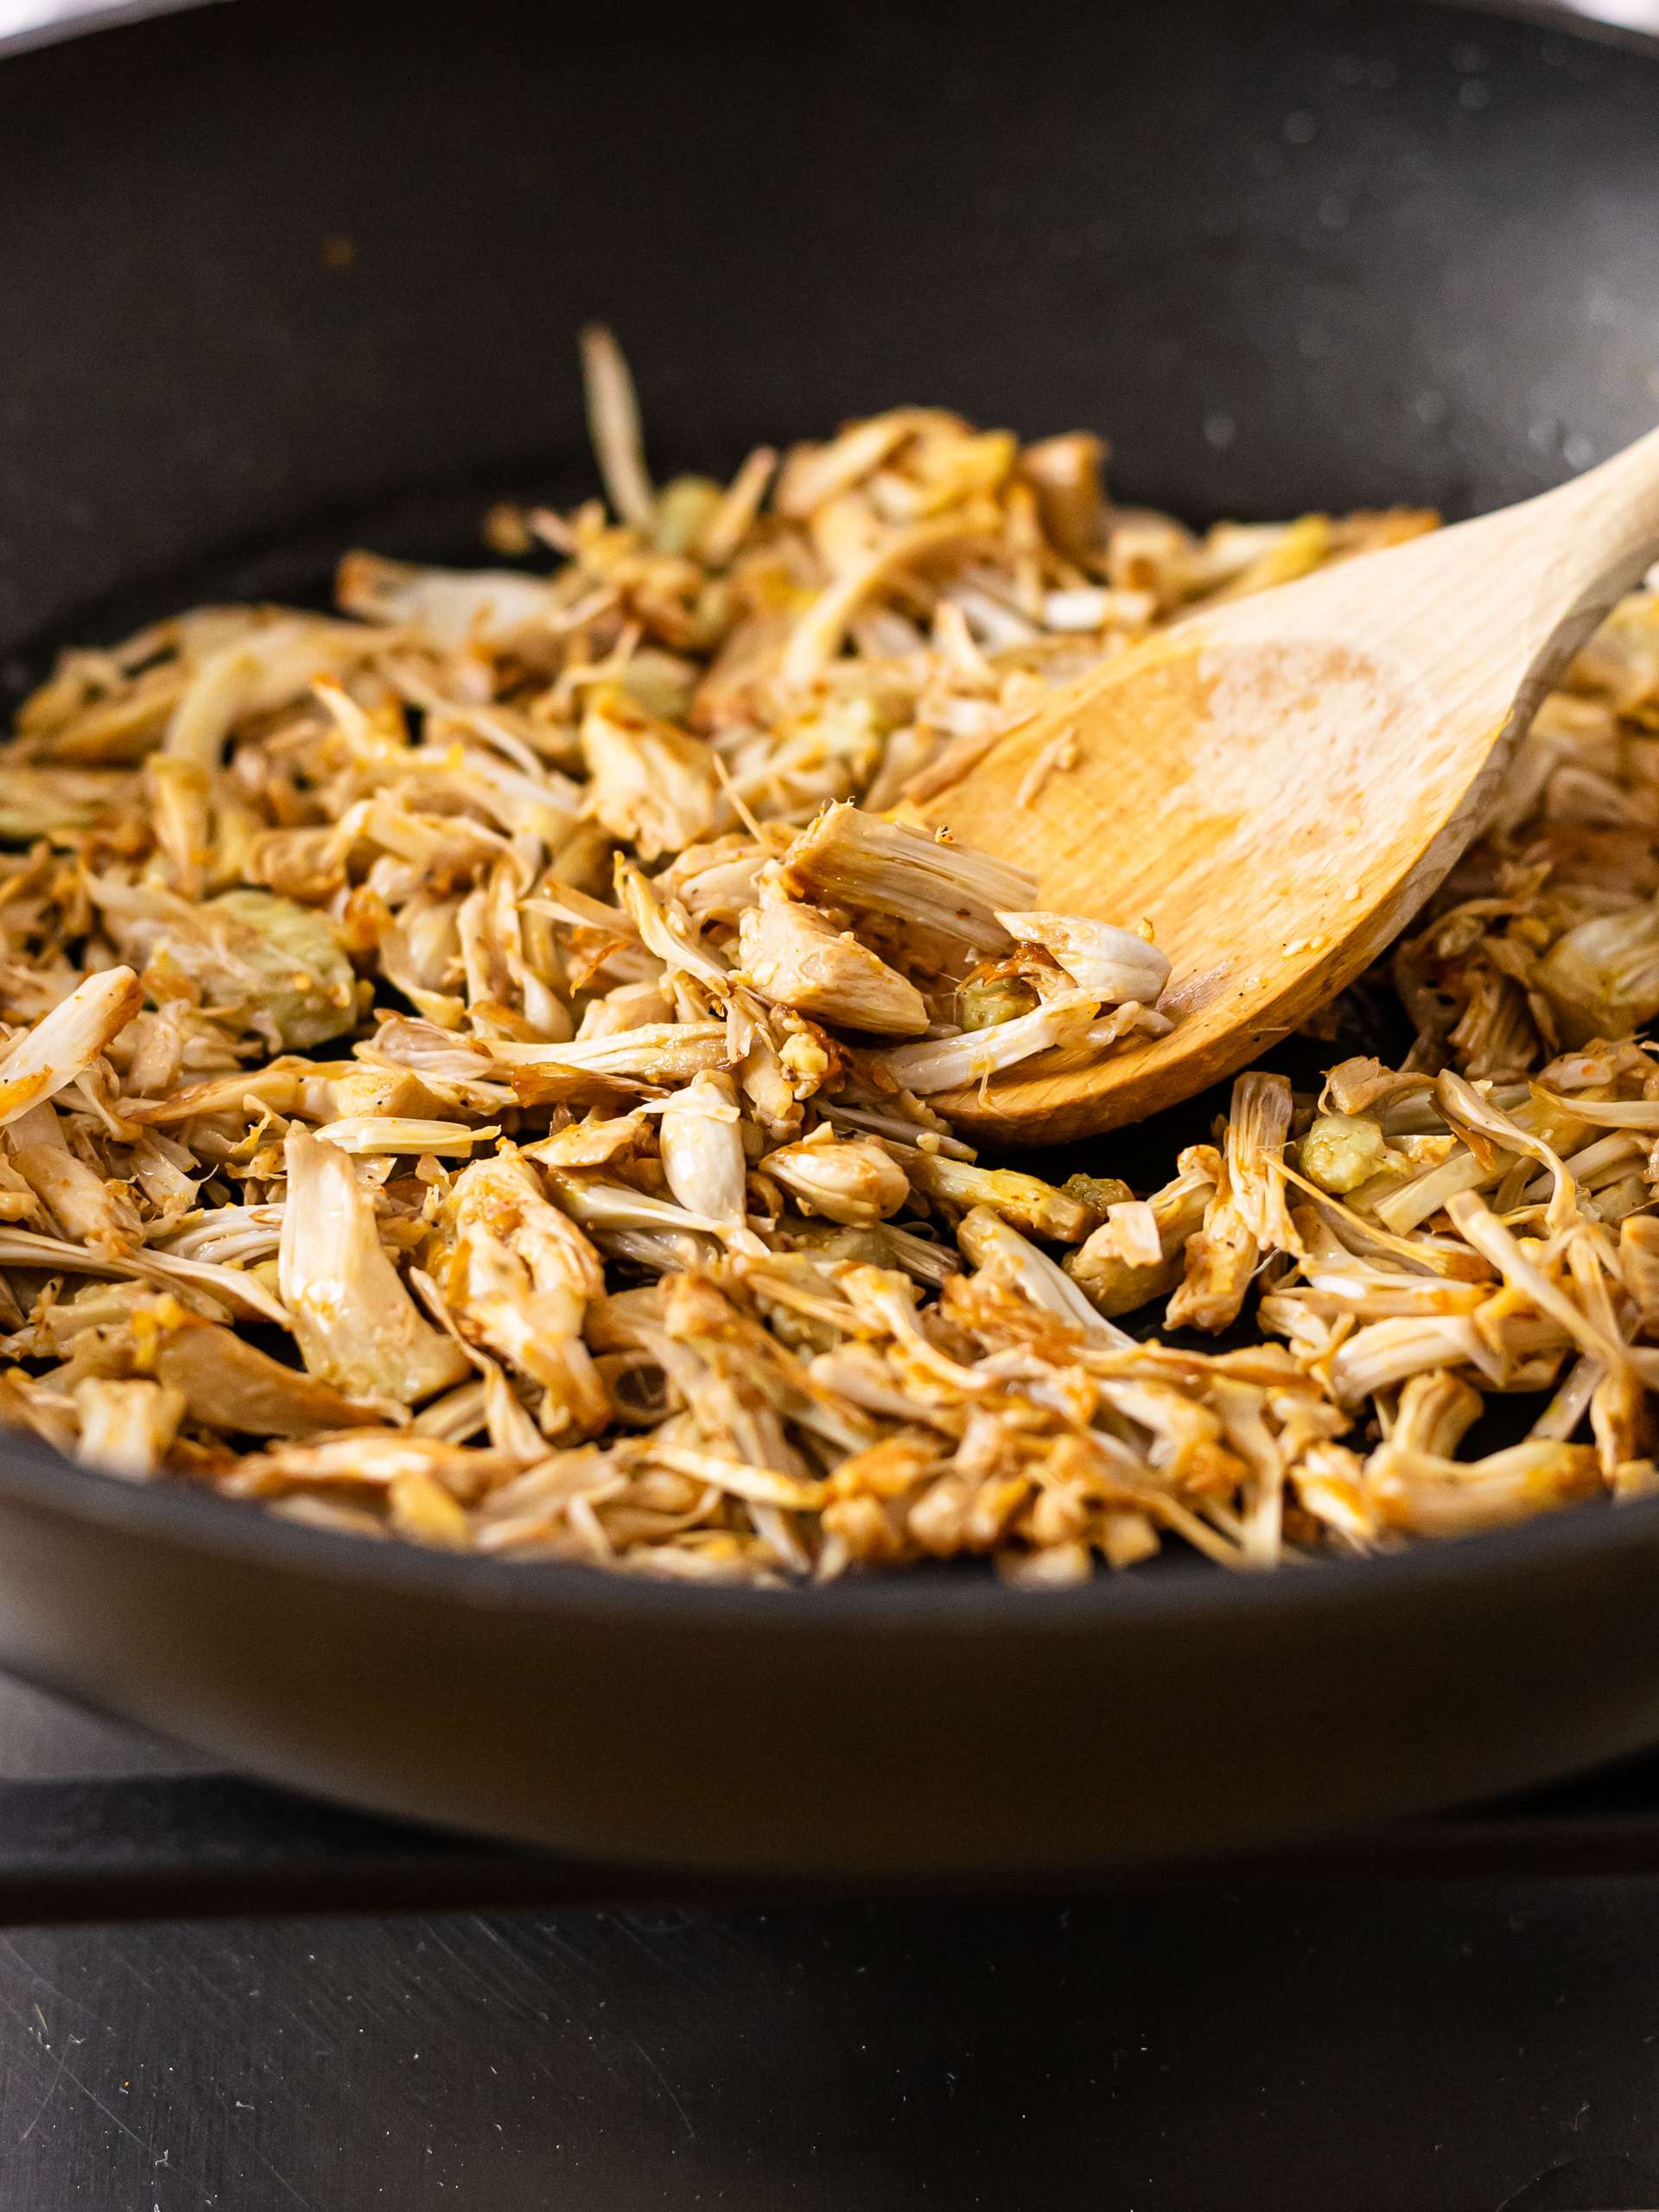 pulled jackfruit cooked in a skillet